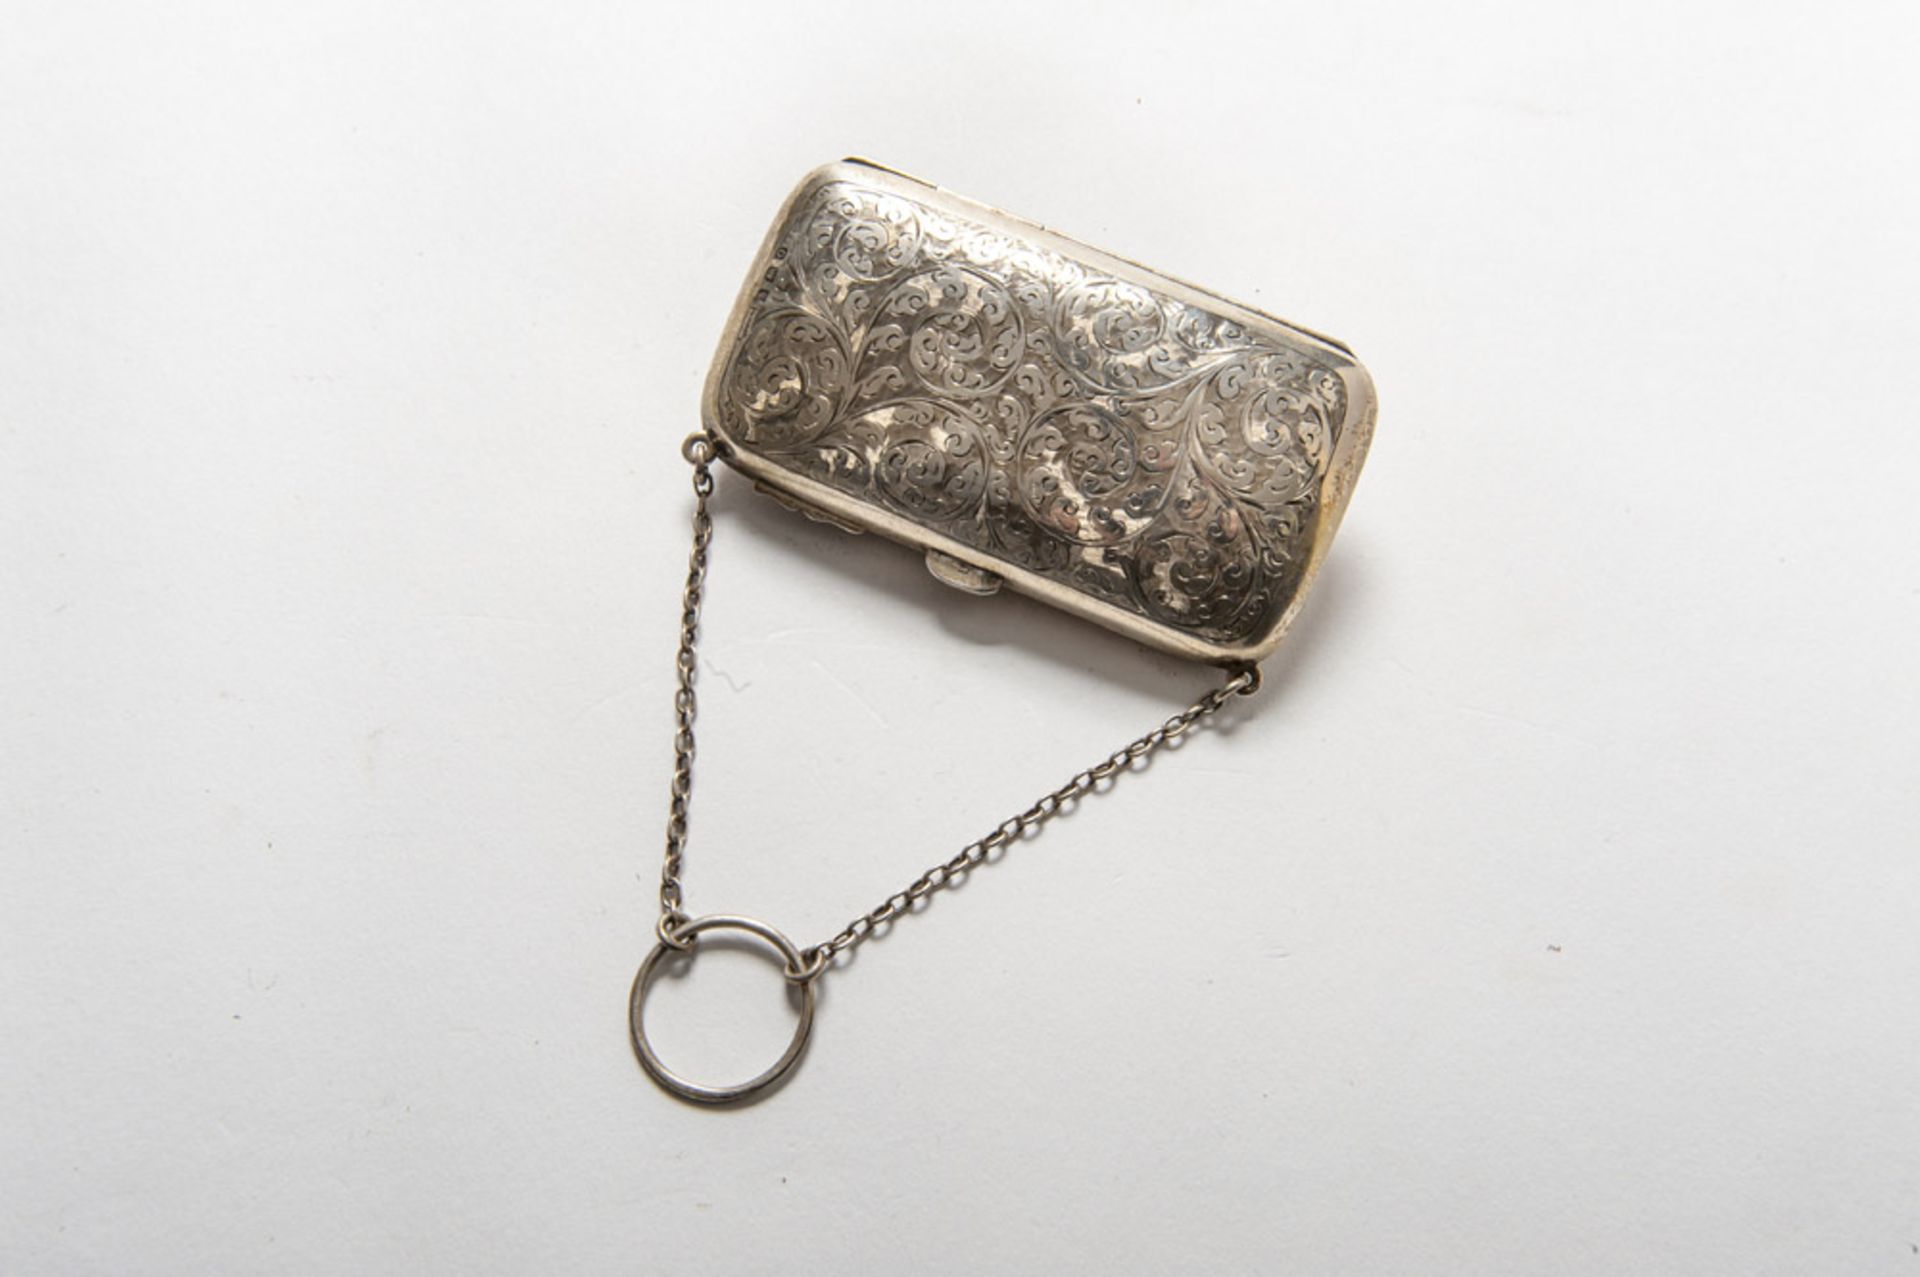 SMALL SILVER BAG, PUNCH BIRMINGHAM 1913 chiseled to motives for leaves. Leather inside. Measures cm.